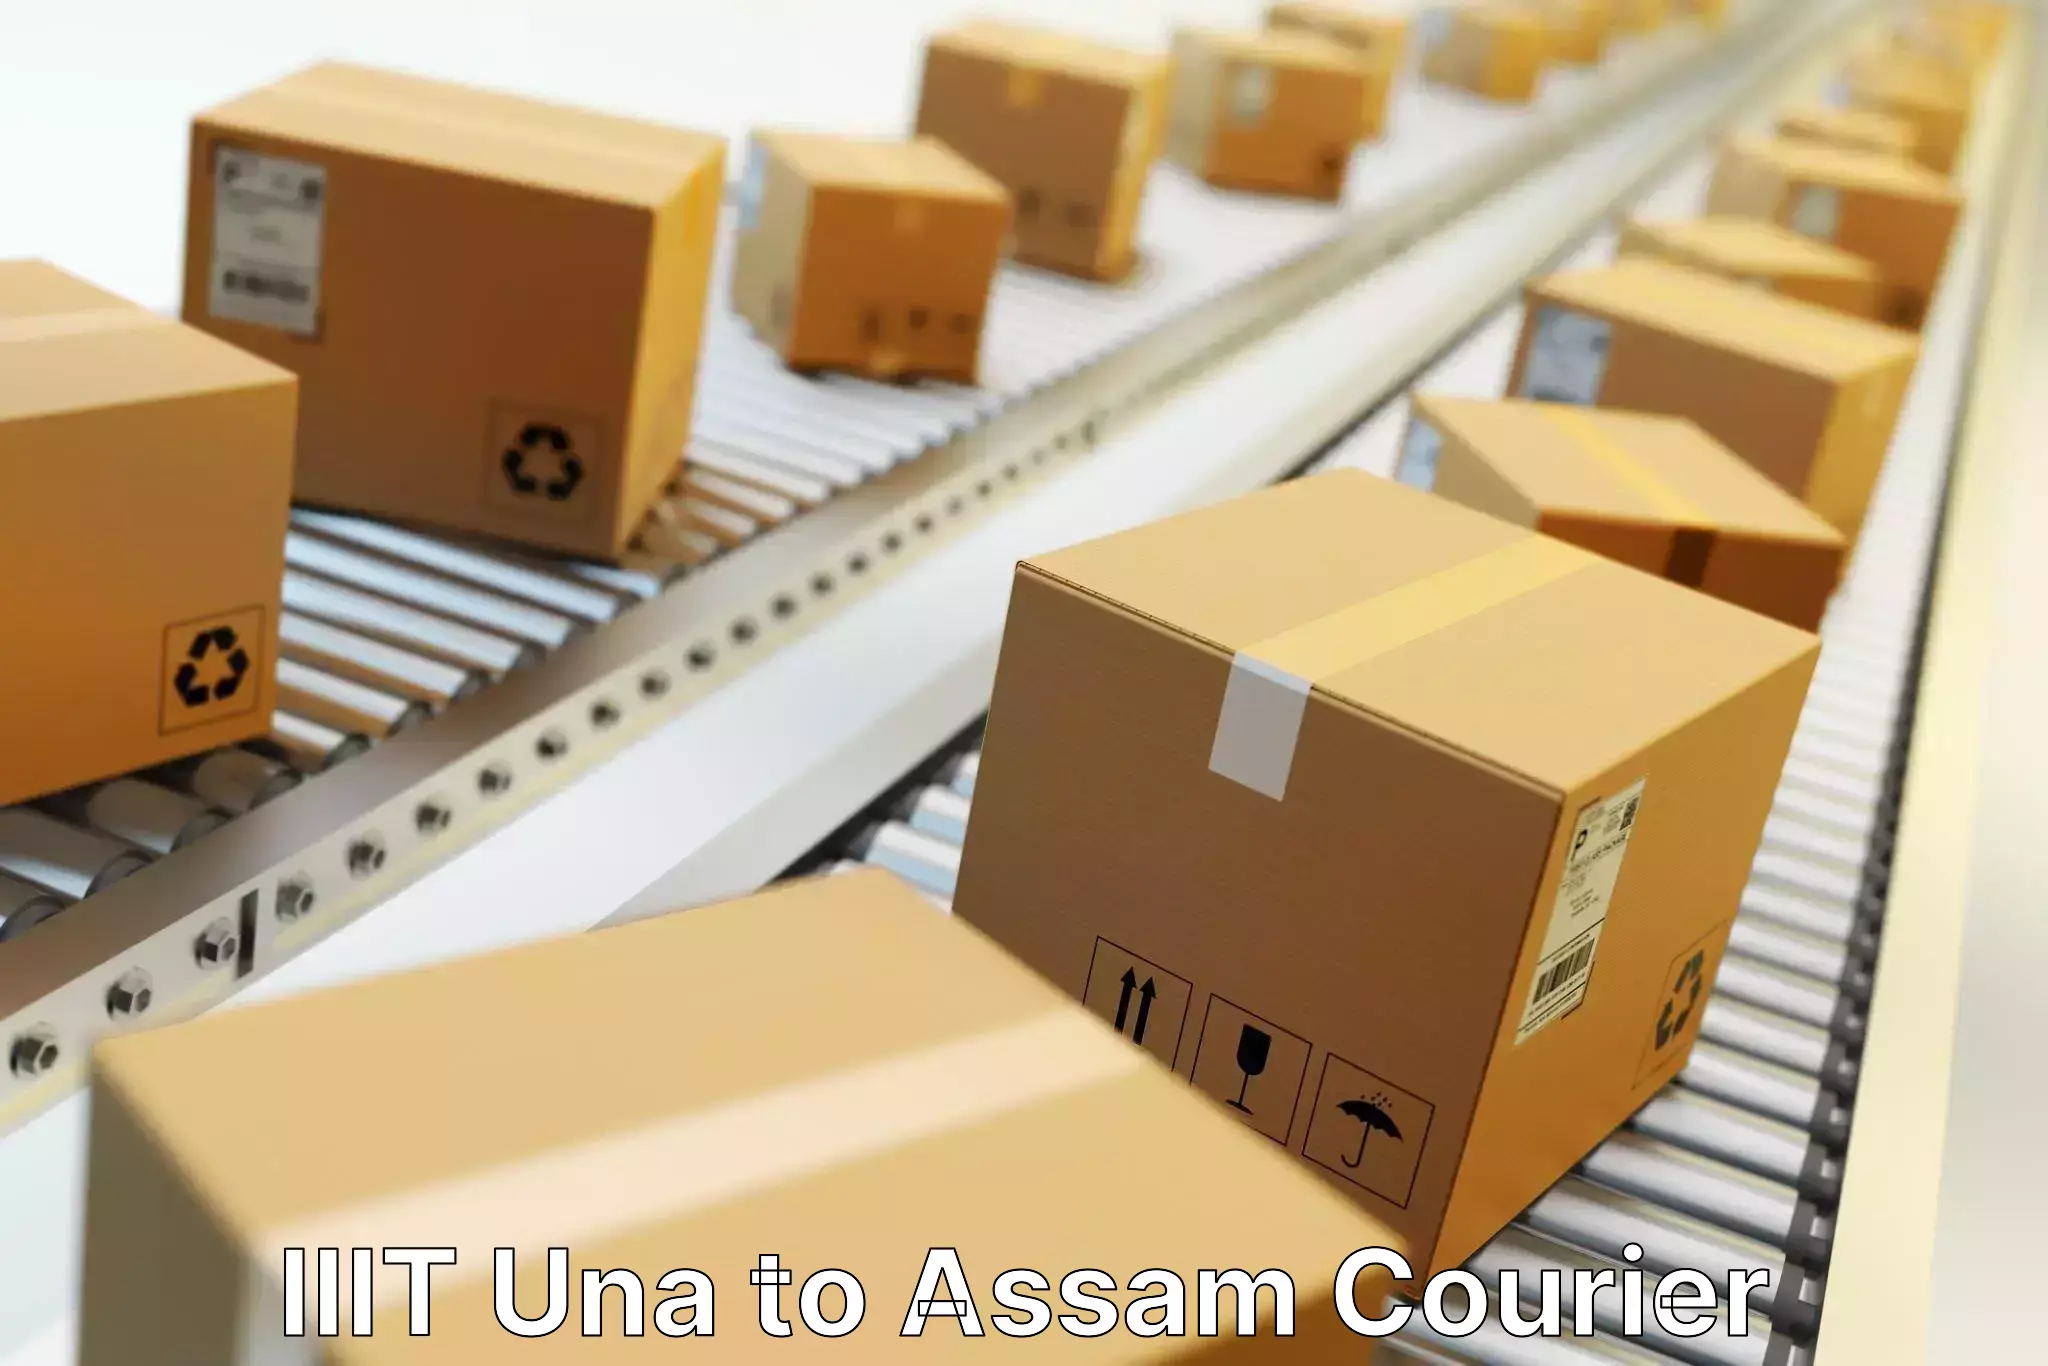 Same-day delivery solutions IIIT Una to Bhergaon